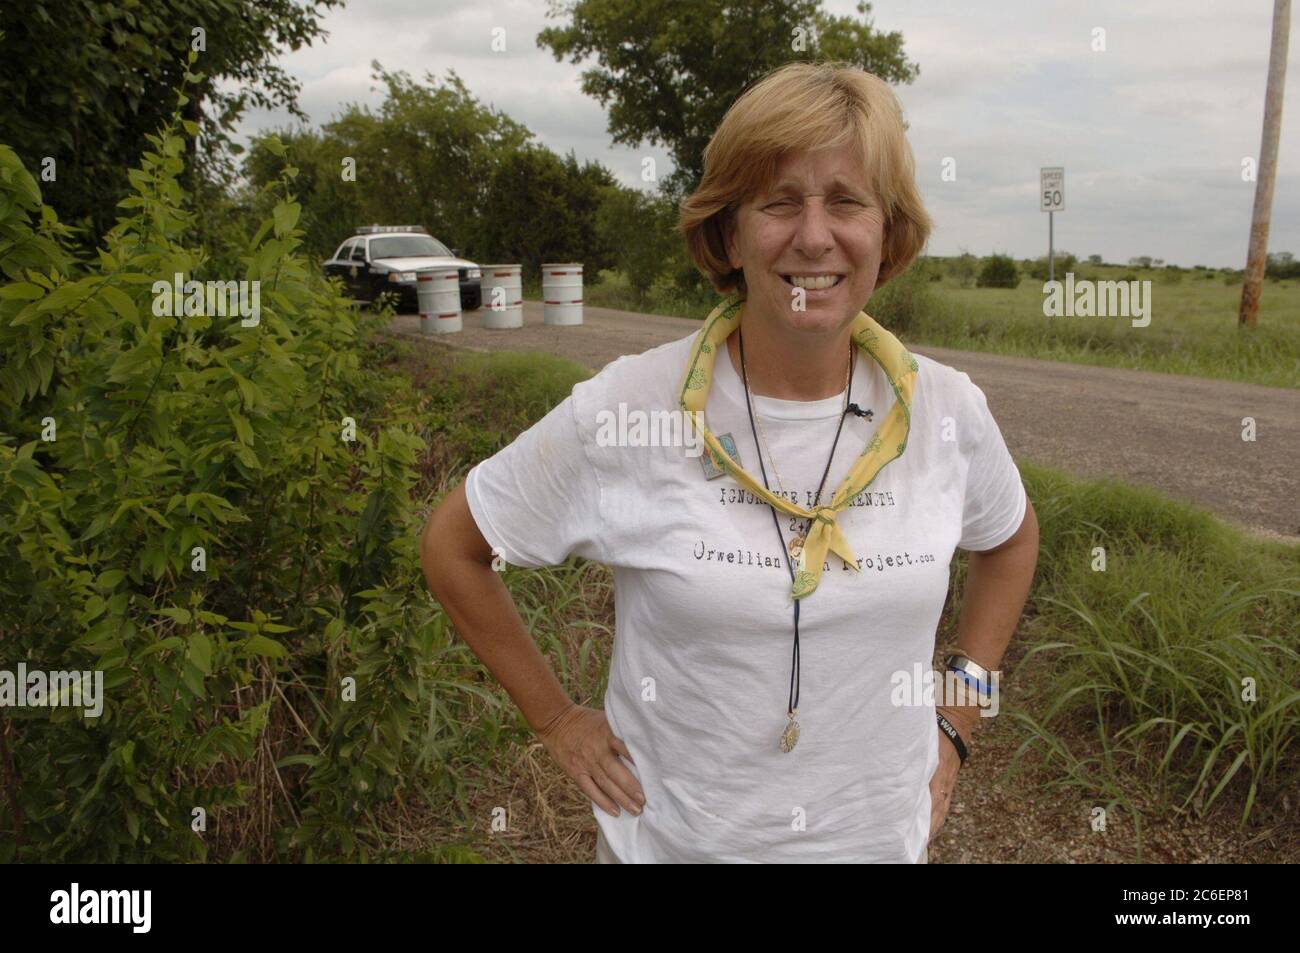 Crawford, Texas August 28, 2005:  Anti-war activist Cindy Sheehan stands at a blockade on the road leading to the ranch of  U.S. President George W. Bush about 10 miles out of Crawford. Sheehan, whose son Casey died in action in Iraq in 2004, has organized a series of protests near the Bushes' Texas ranch during the president's summer vacation there.  ©Bob Daemmrich Stock Photo